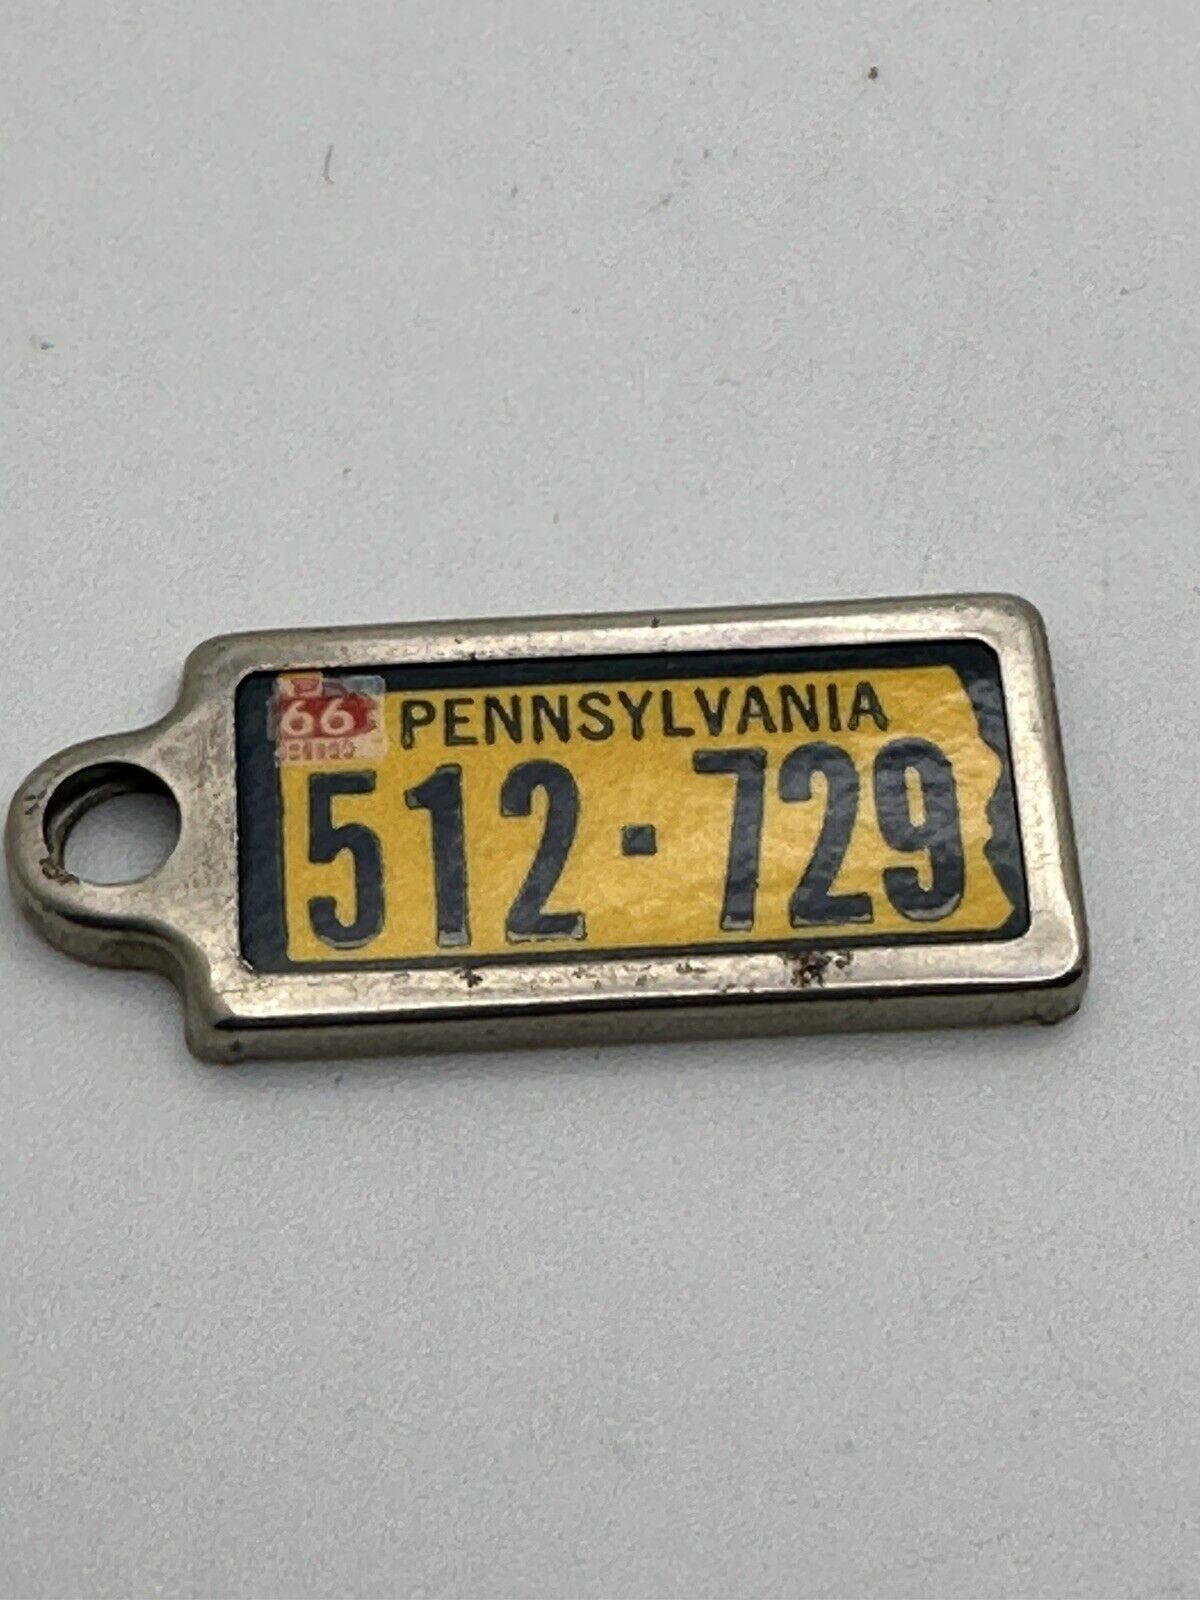 1966 pennsylvania license plate Disabled Key Chain Ring